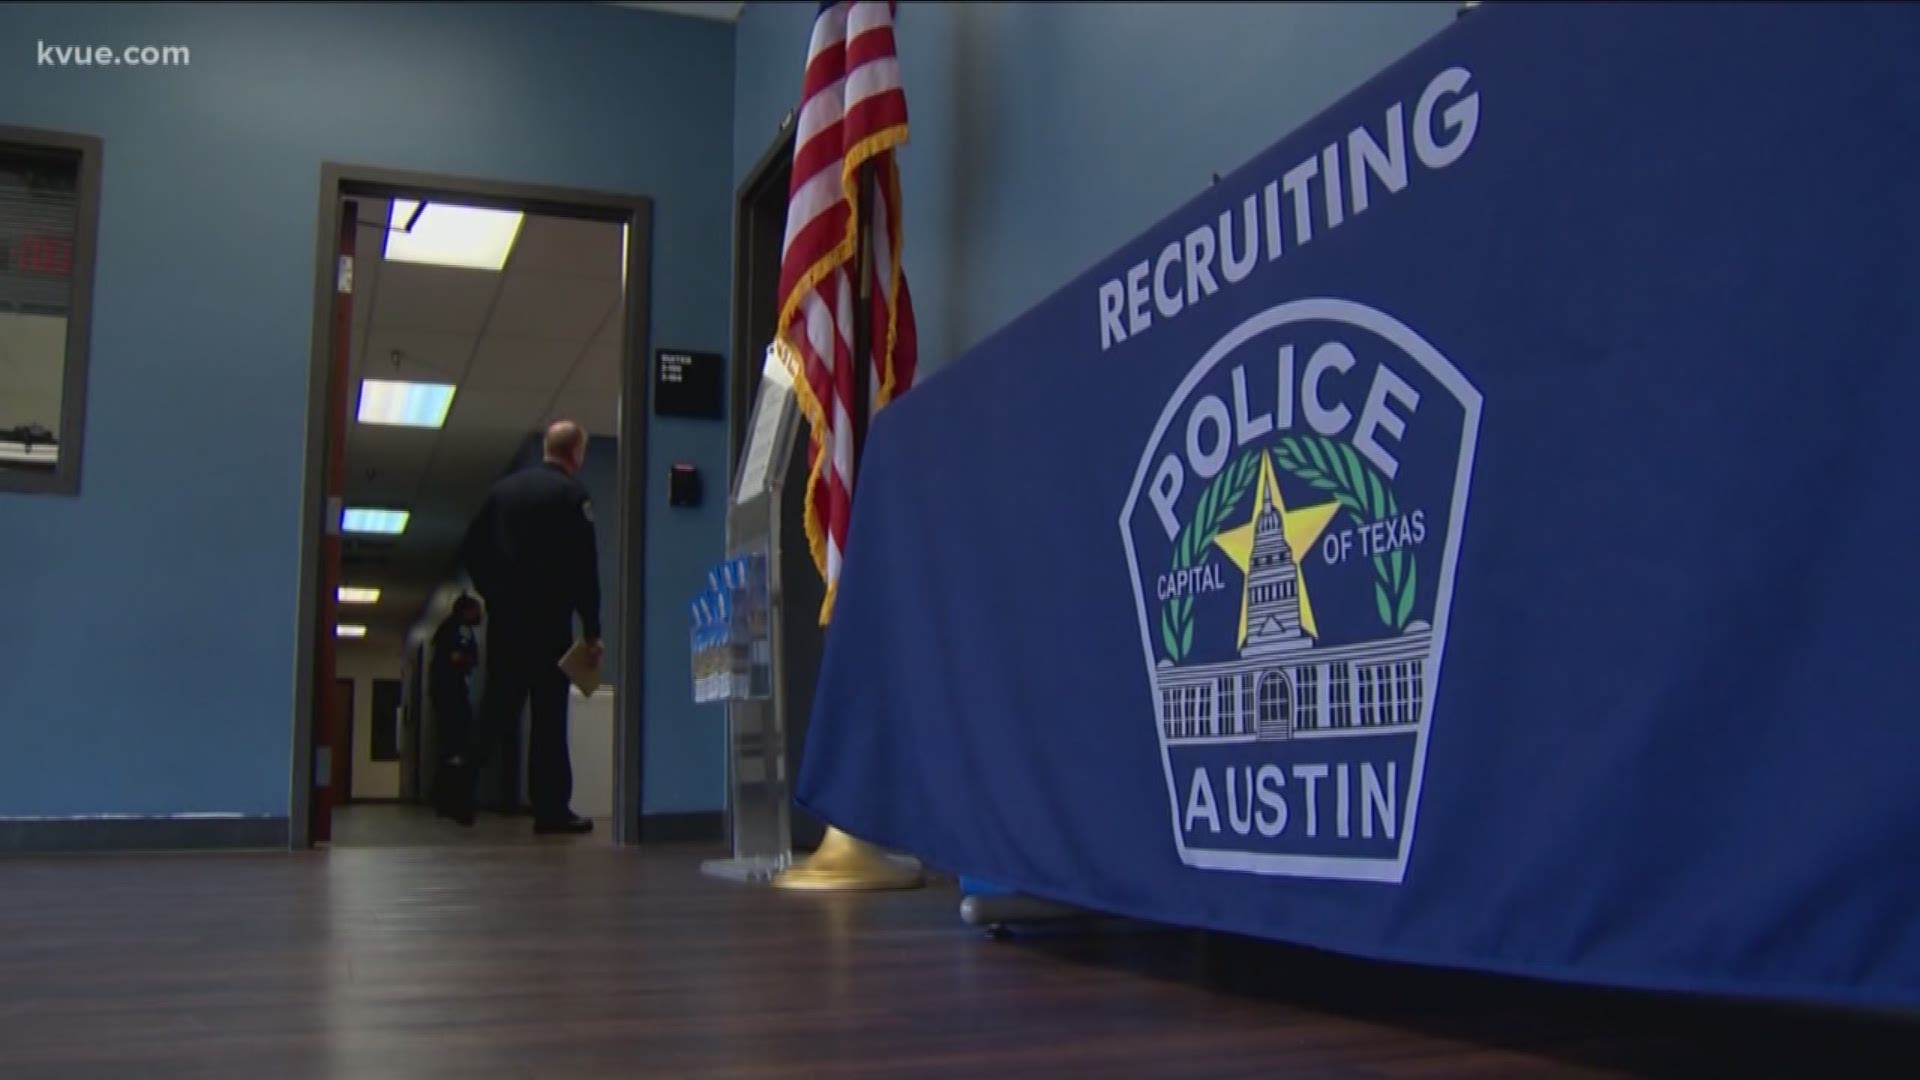 The council unanimously voted in favor of a multi-pronged investigation into the Austin Police Department and its officers.